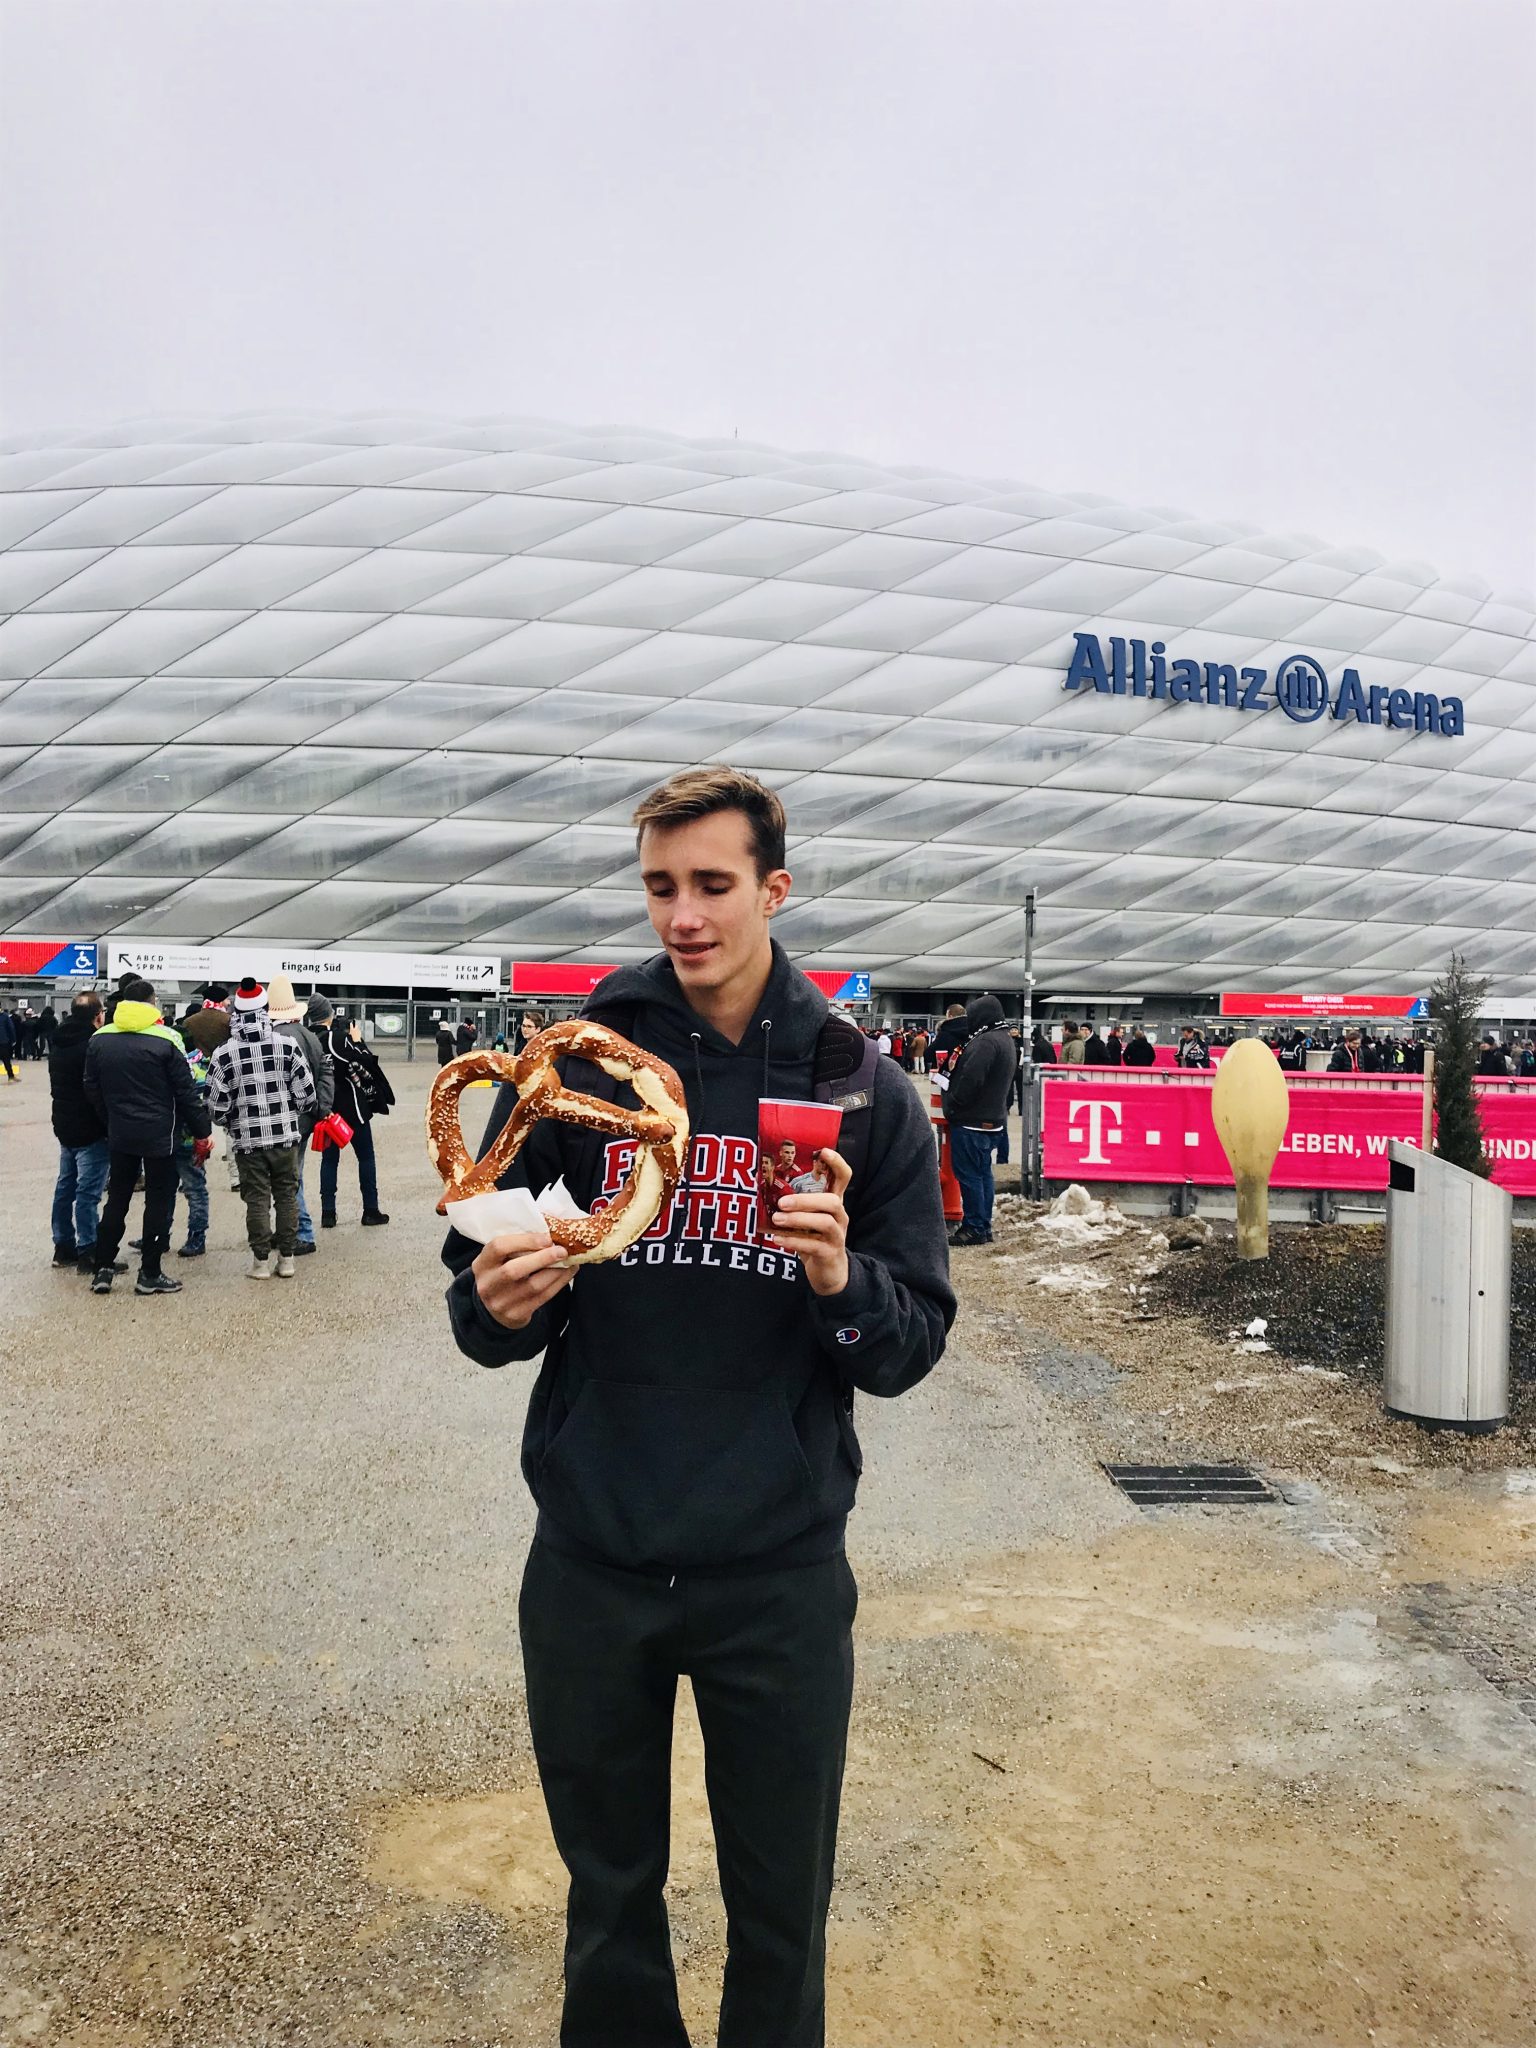 beer before the game at allianz arena in munich germany with pretzels and beer